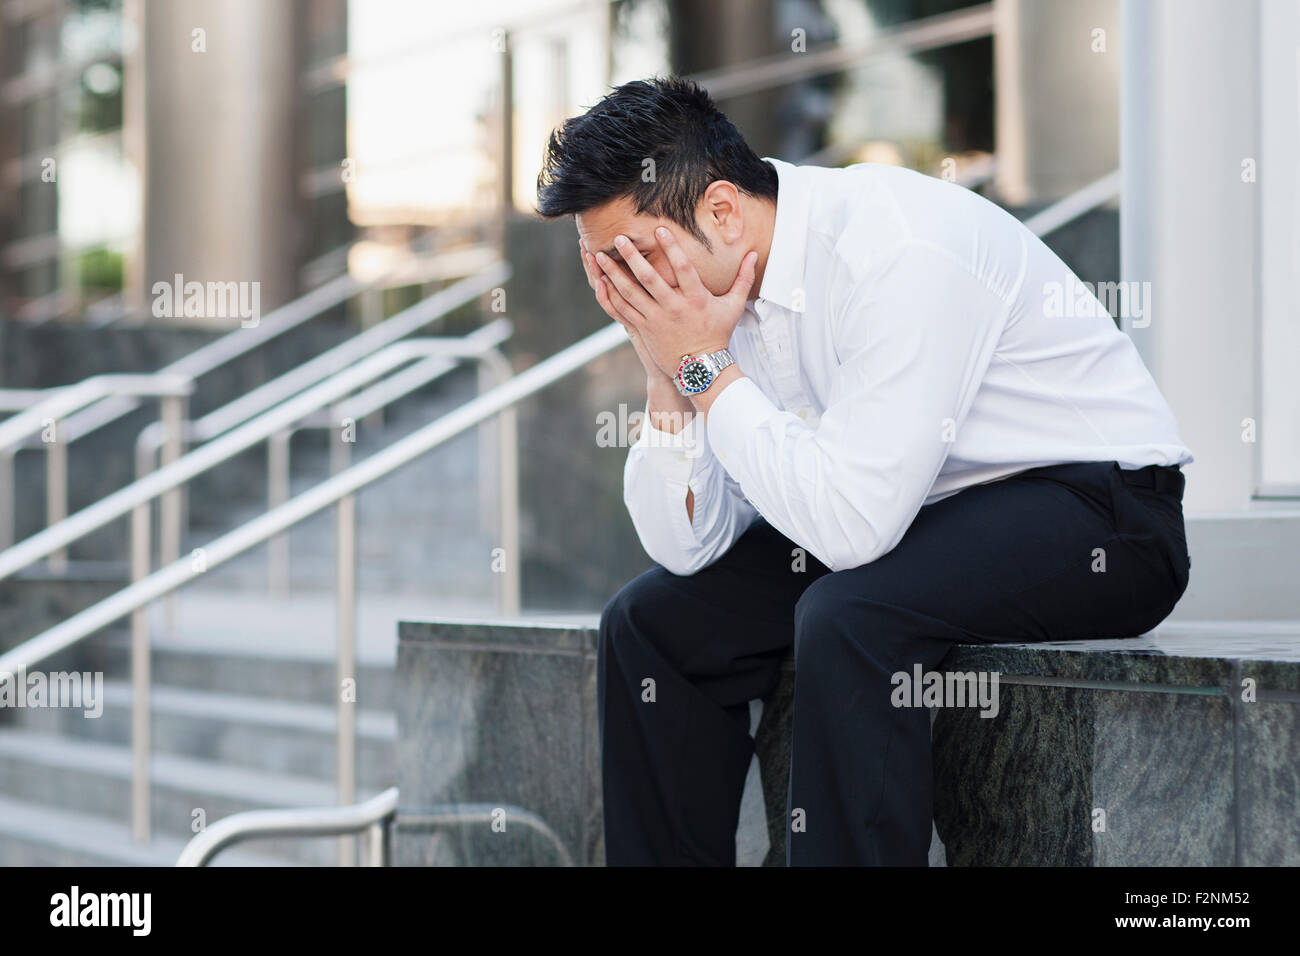 Stressed mixed race businessman covering his face Stock Photo